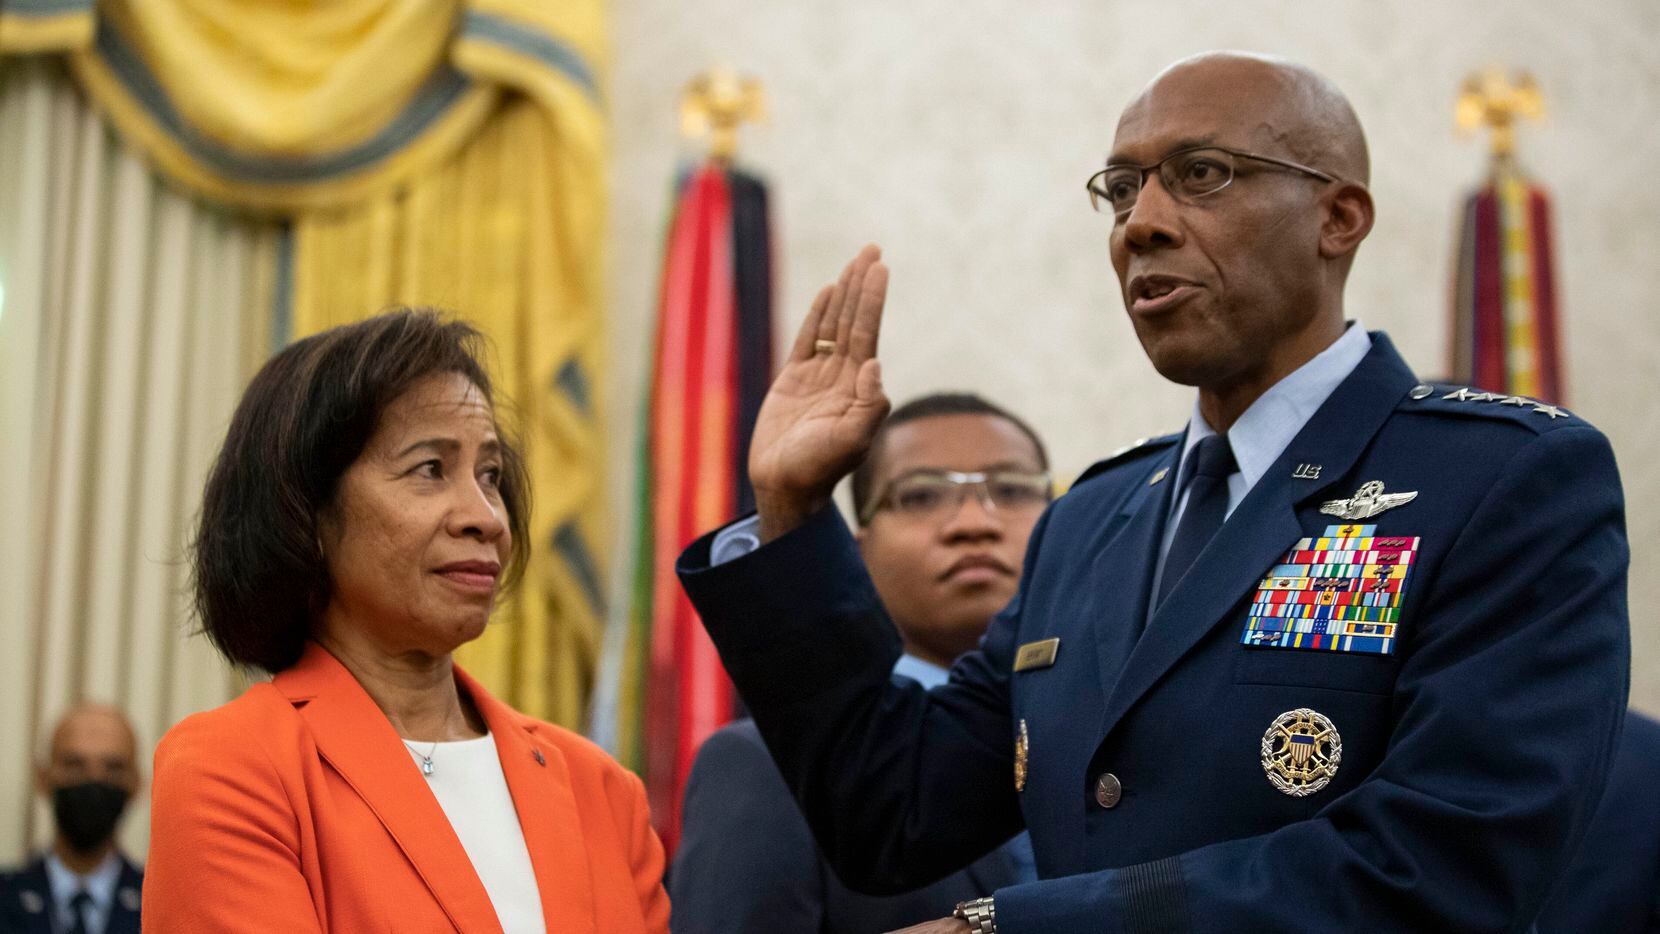 He proved the sky’s the limit for Black airmen